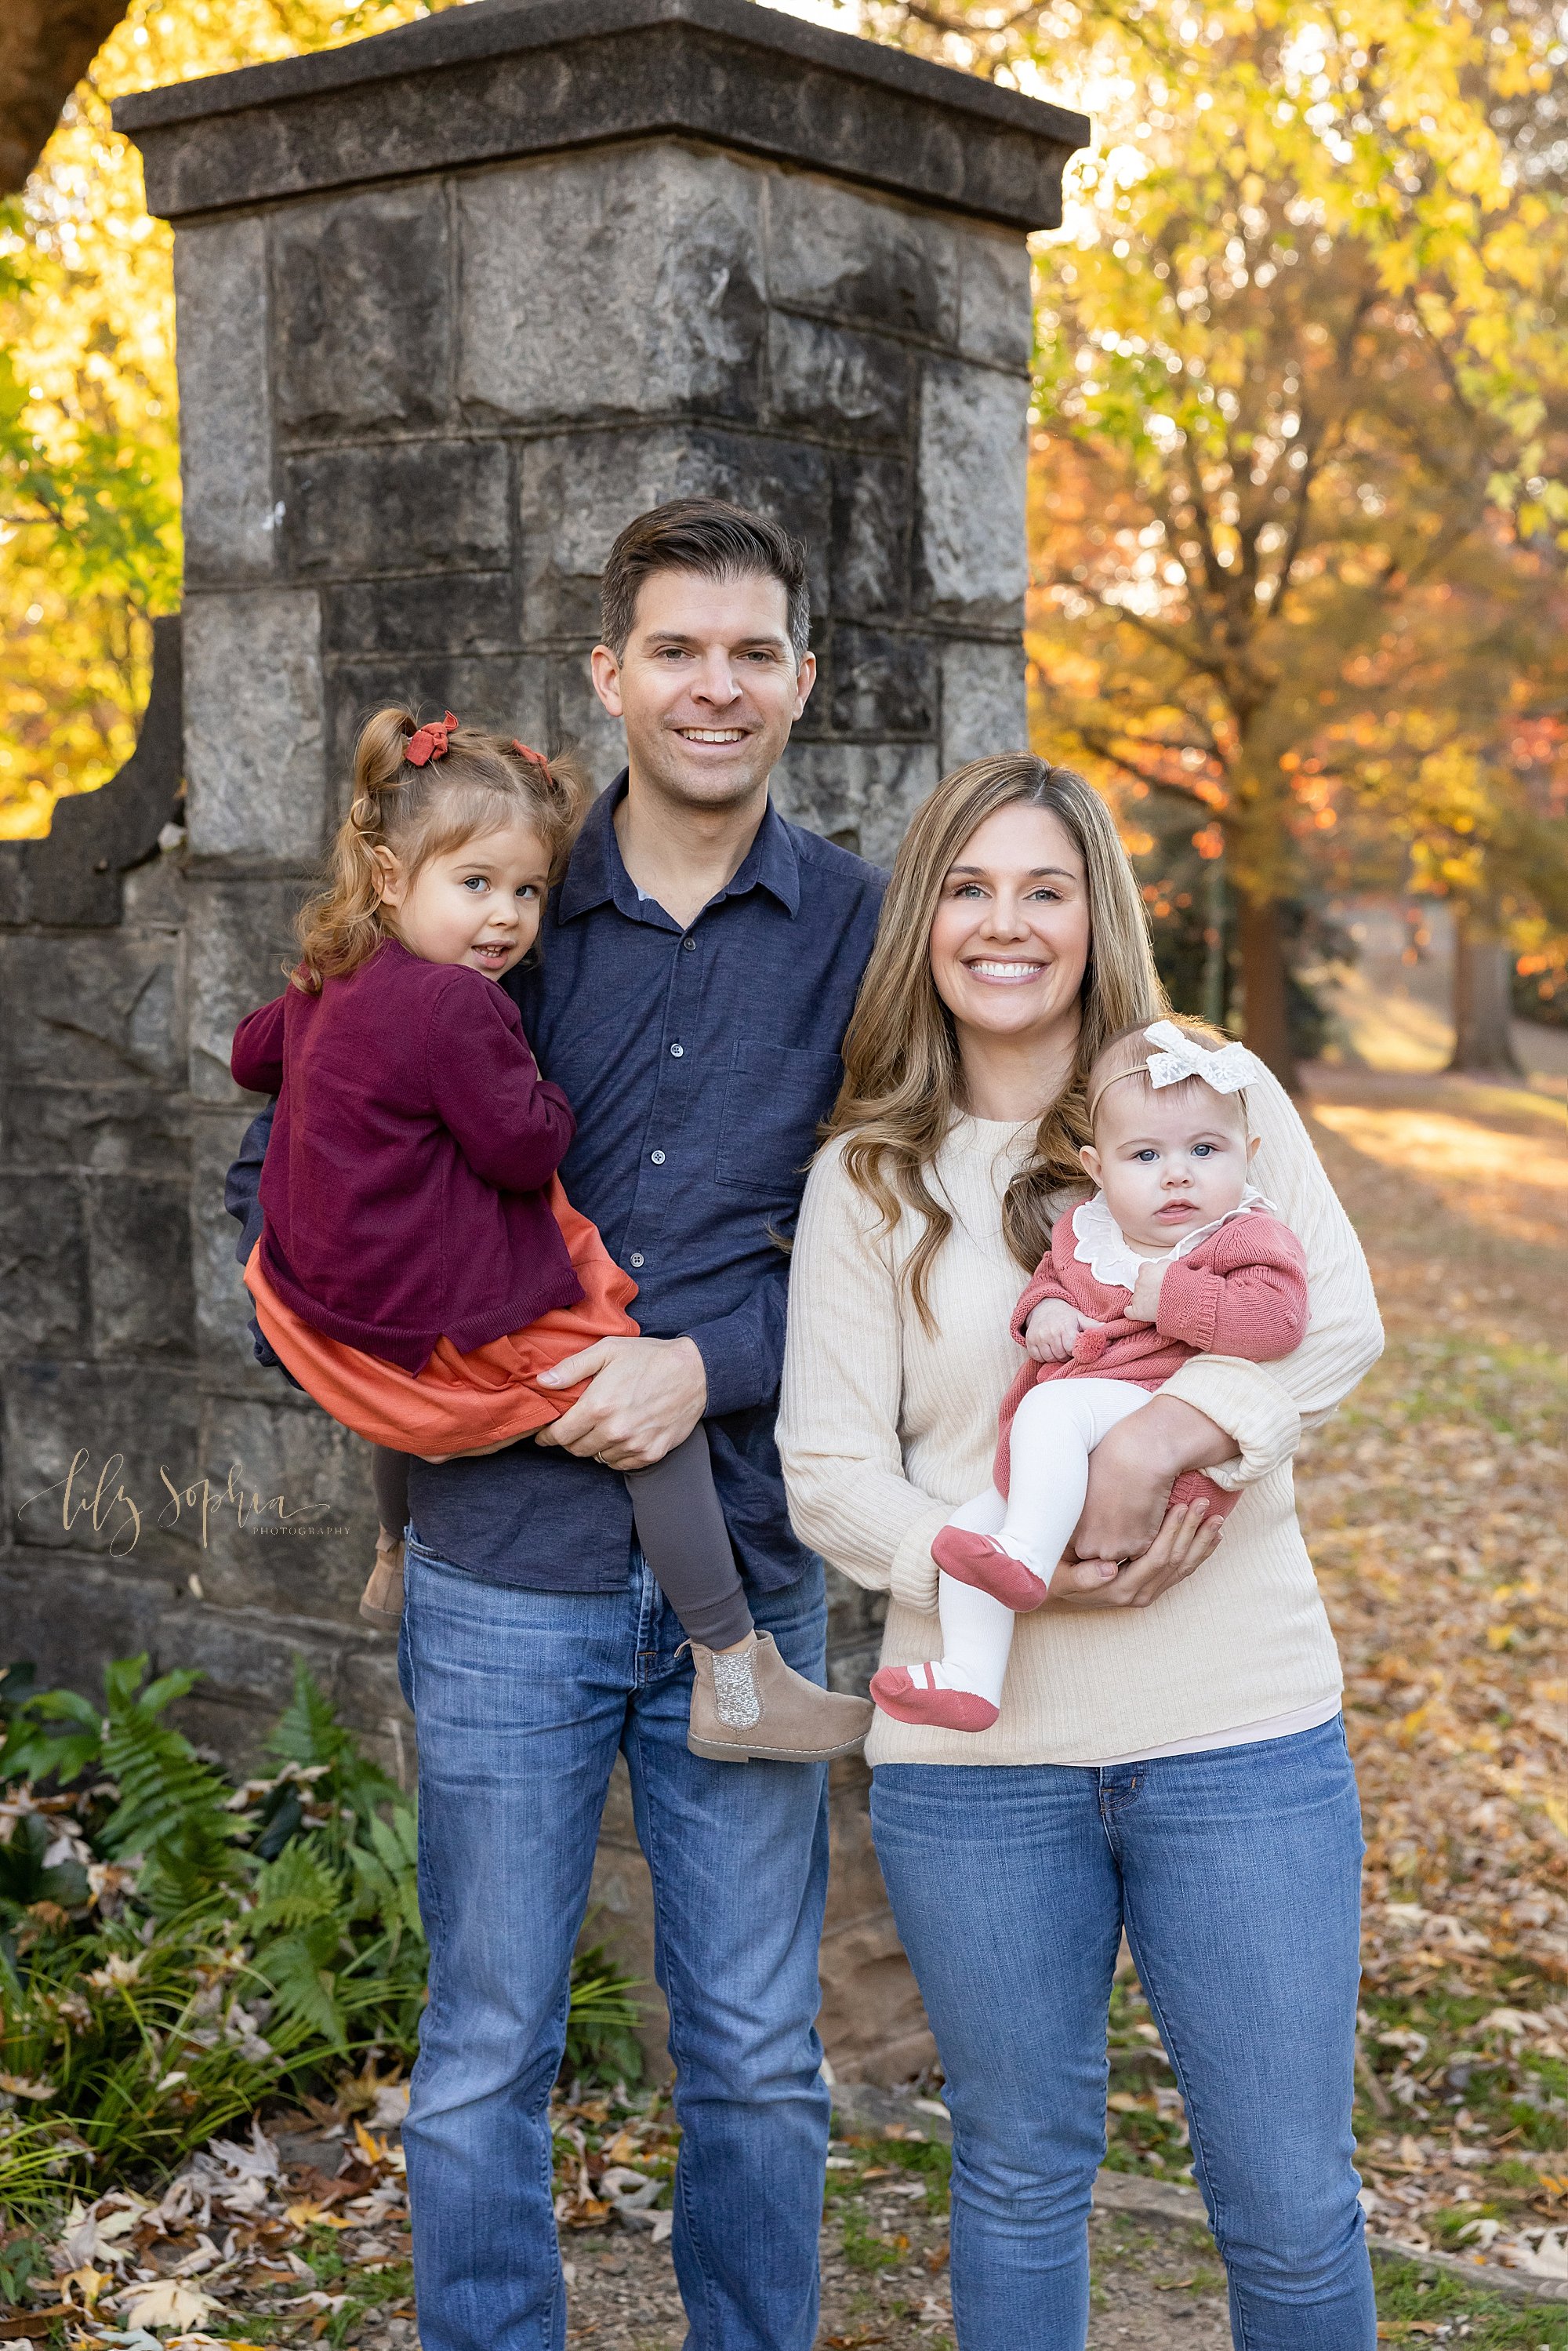 intown-atlanta-decatur-buckhead-brookhaven-fall-family-park-leaves-outdoor-pictures_3940.jpg